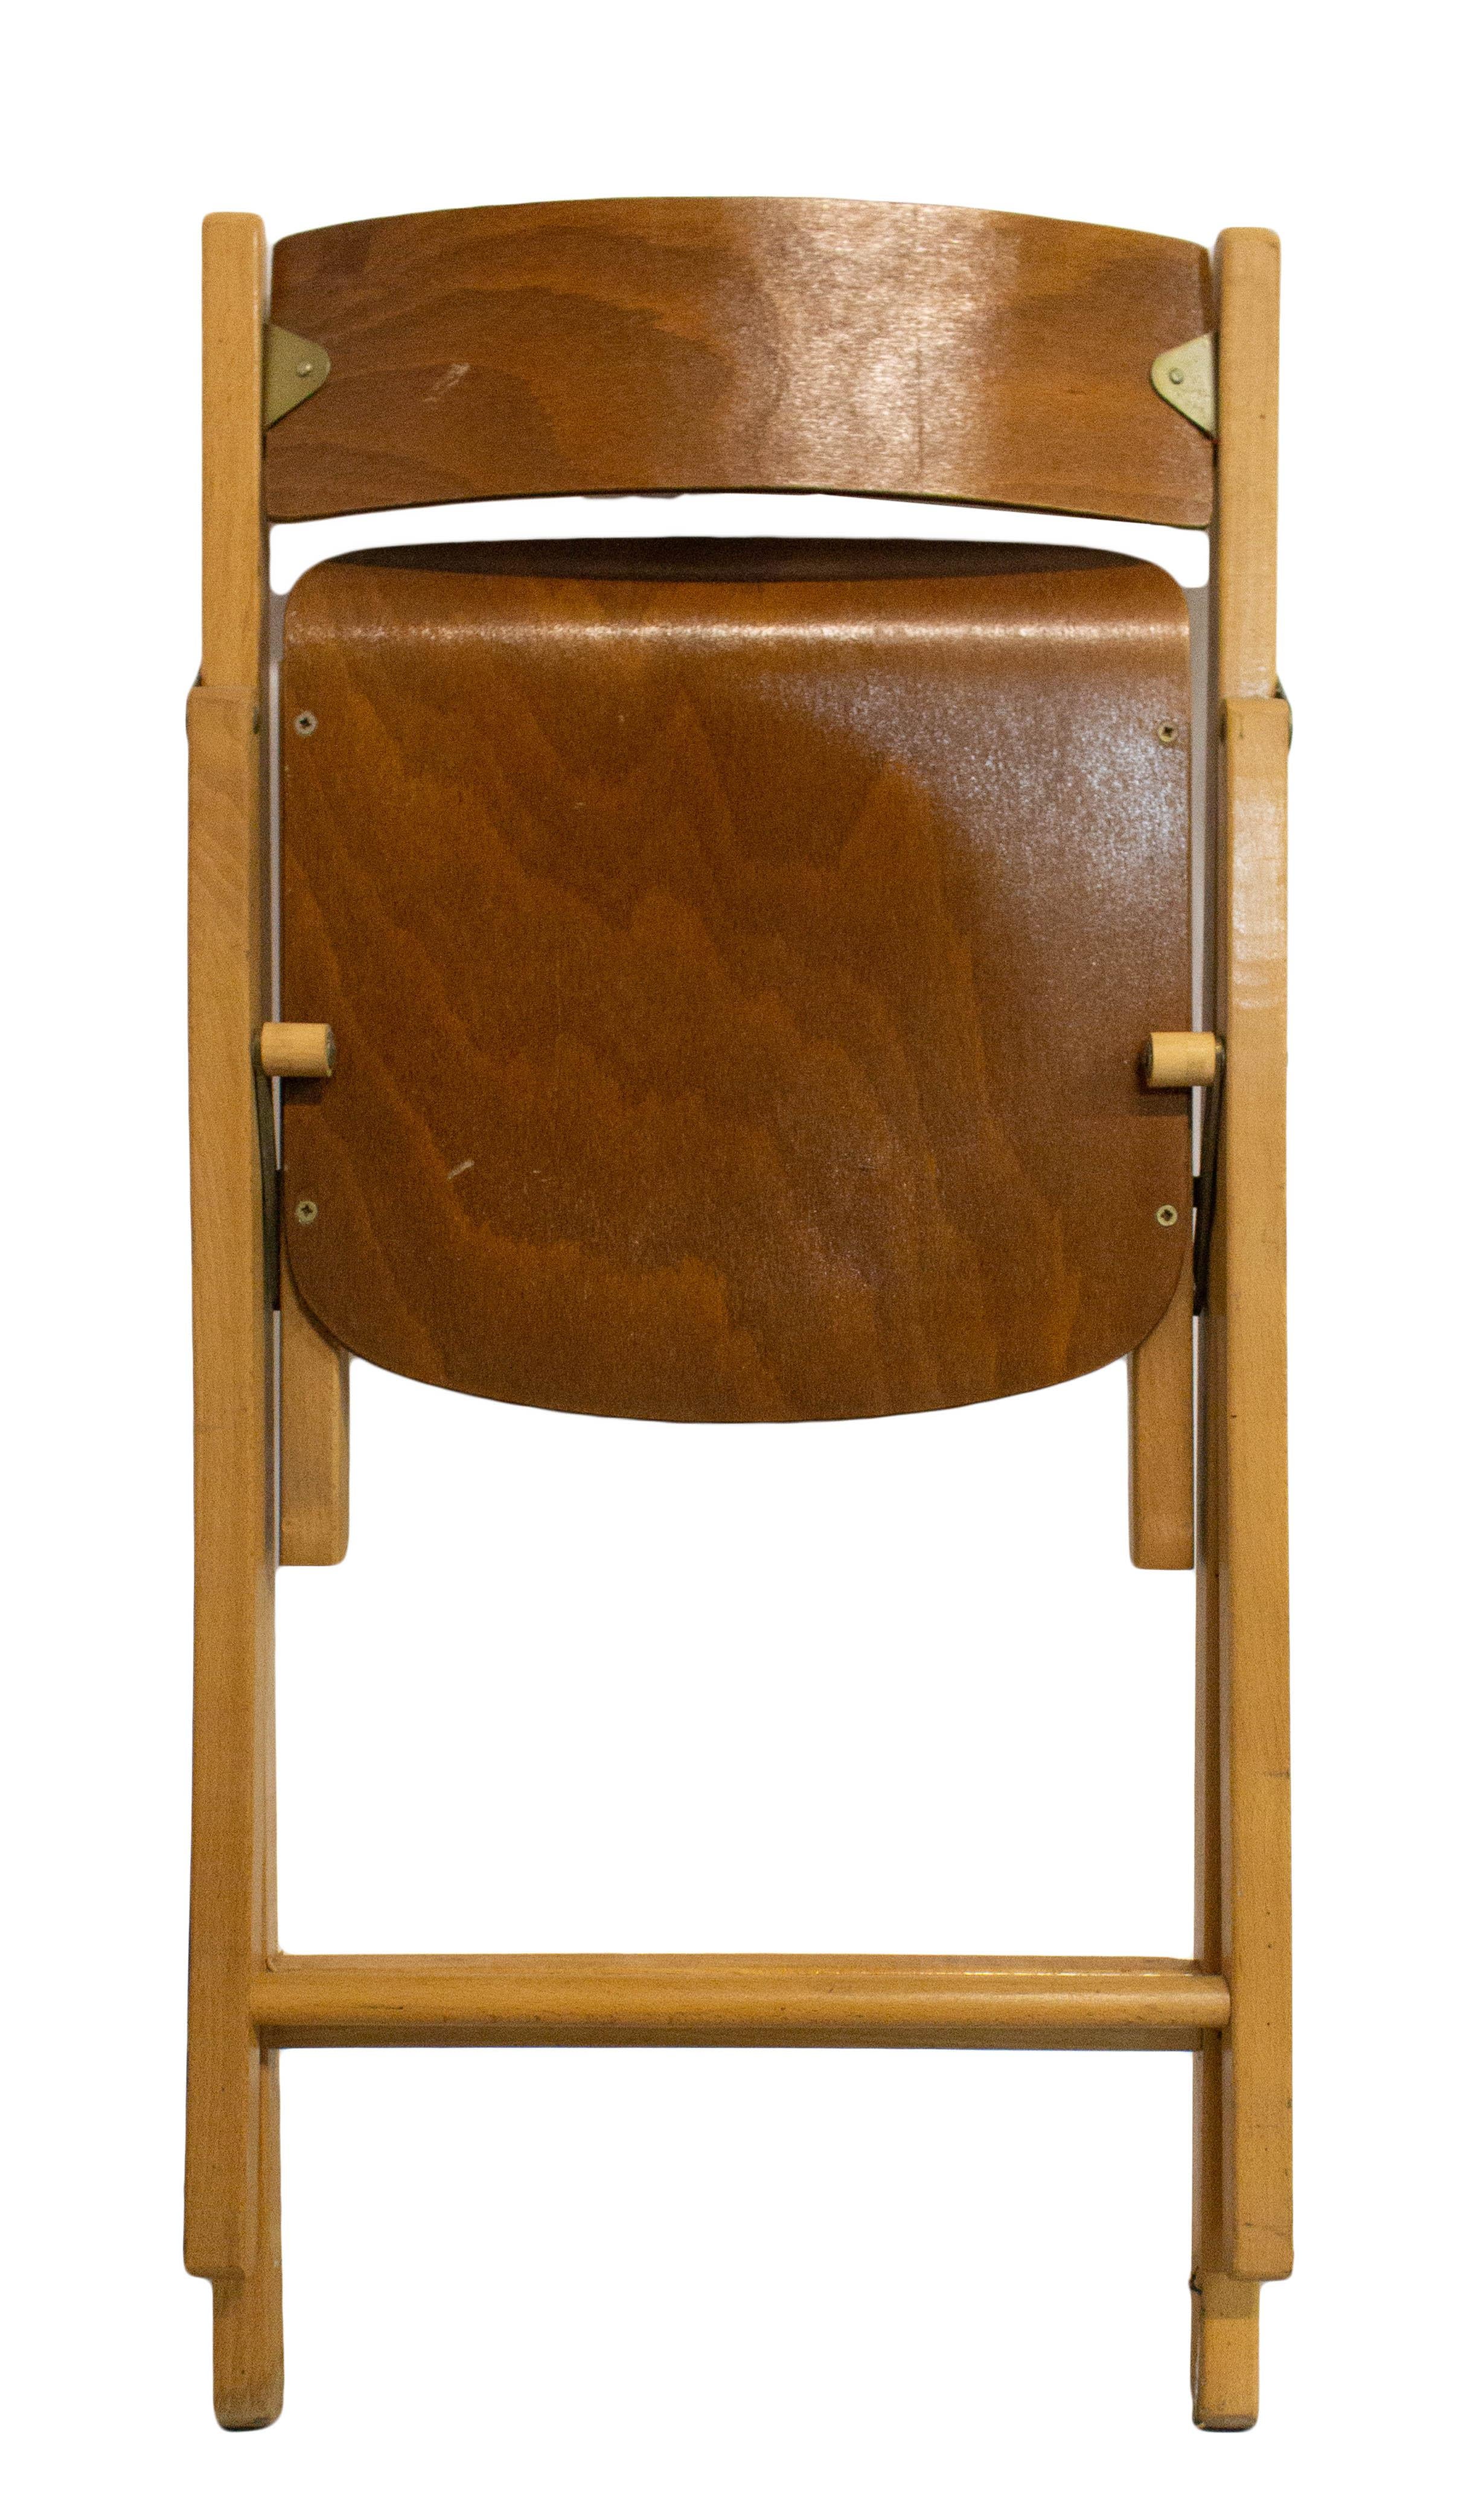 French Midcentury Wood Folding Chair, 1970 For Sale 1